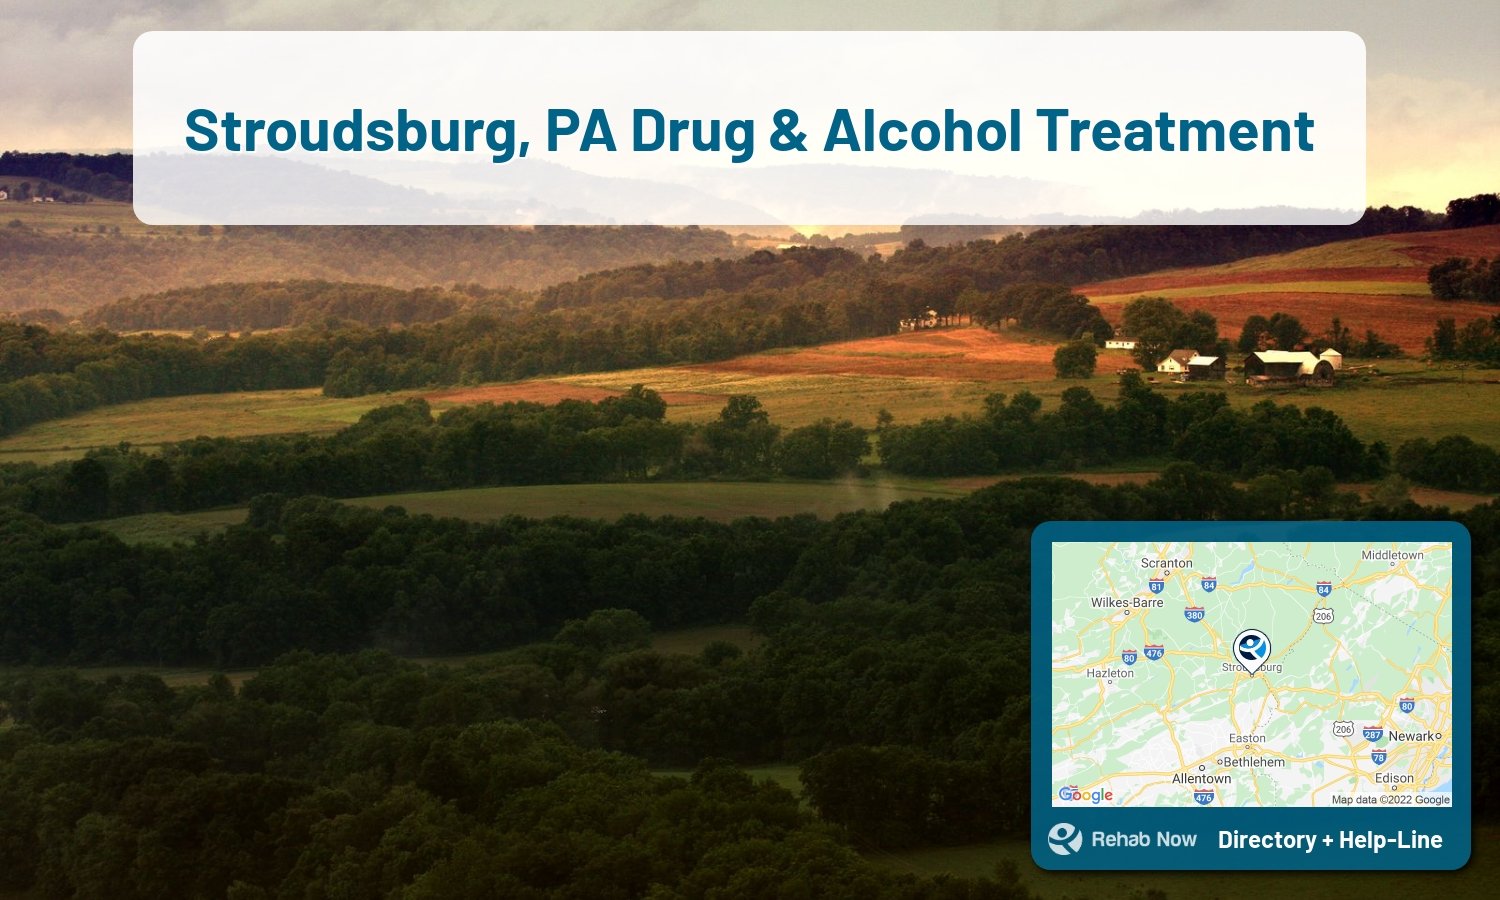 View options, availability, treatment methods, and more, for drug rehab and alcohol treatment in Stroudsburg, Pennsylvania